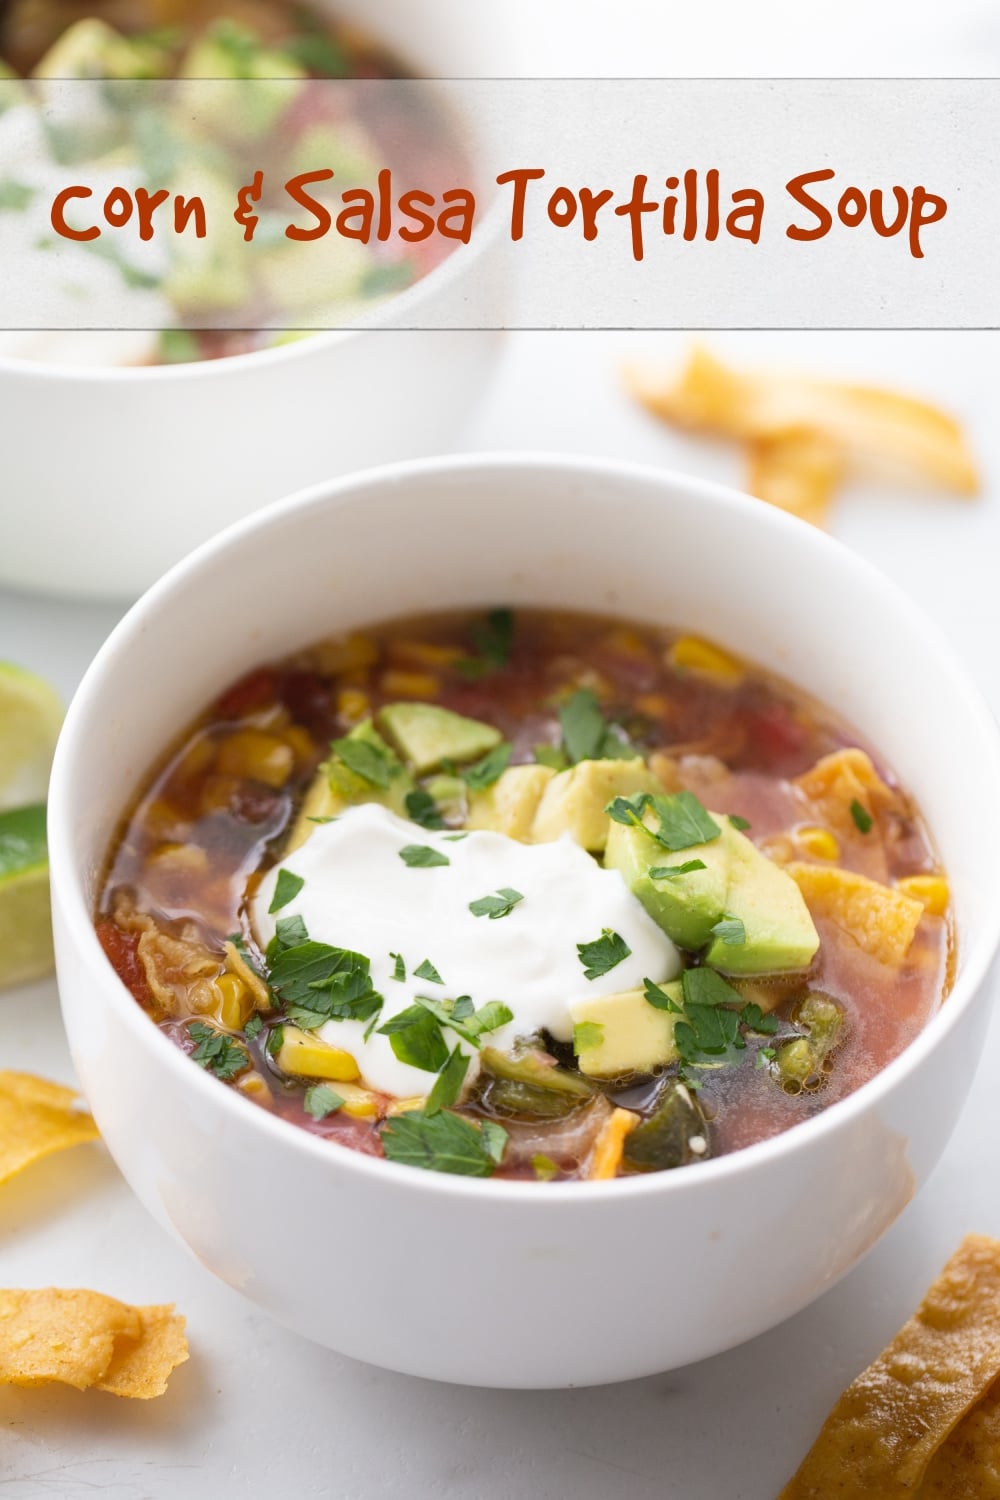 A zesty corn and salsa based tortilla soup that is not only packed with flavor, but can be on the dinner table in under an hour. via @cmpollak1